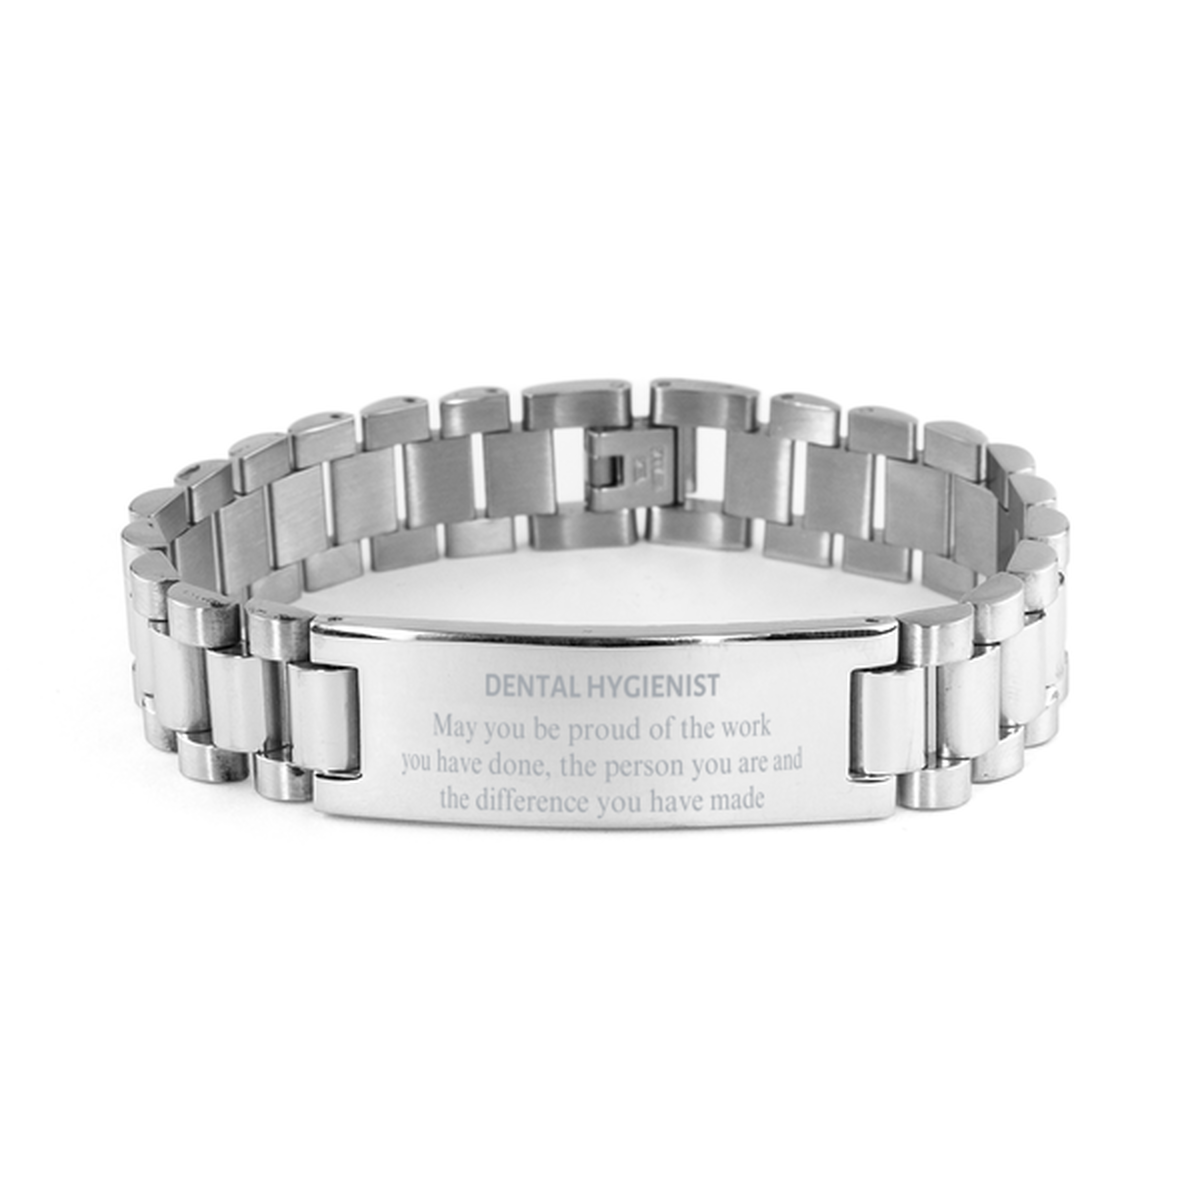 Dental Hygienist May you be proud of the work you have done, Retirement Dental Hygienist Ladder Stainless Steel Bracelet for Colleague Appreciation Gifts Amazing for Dental Hygienist